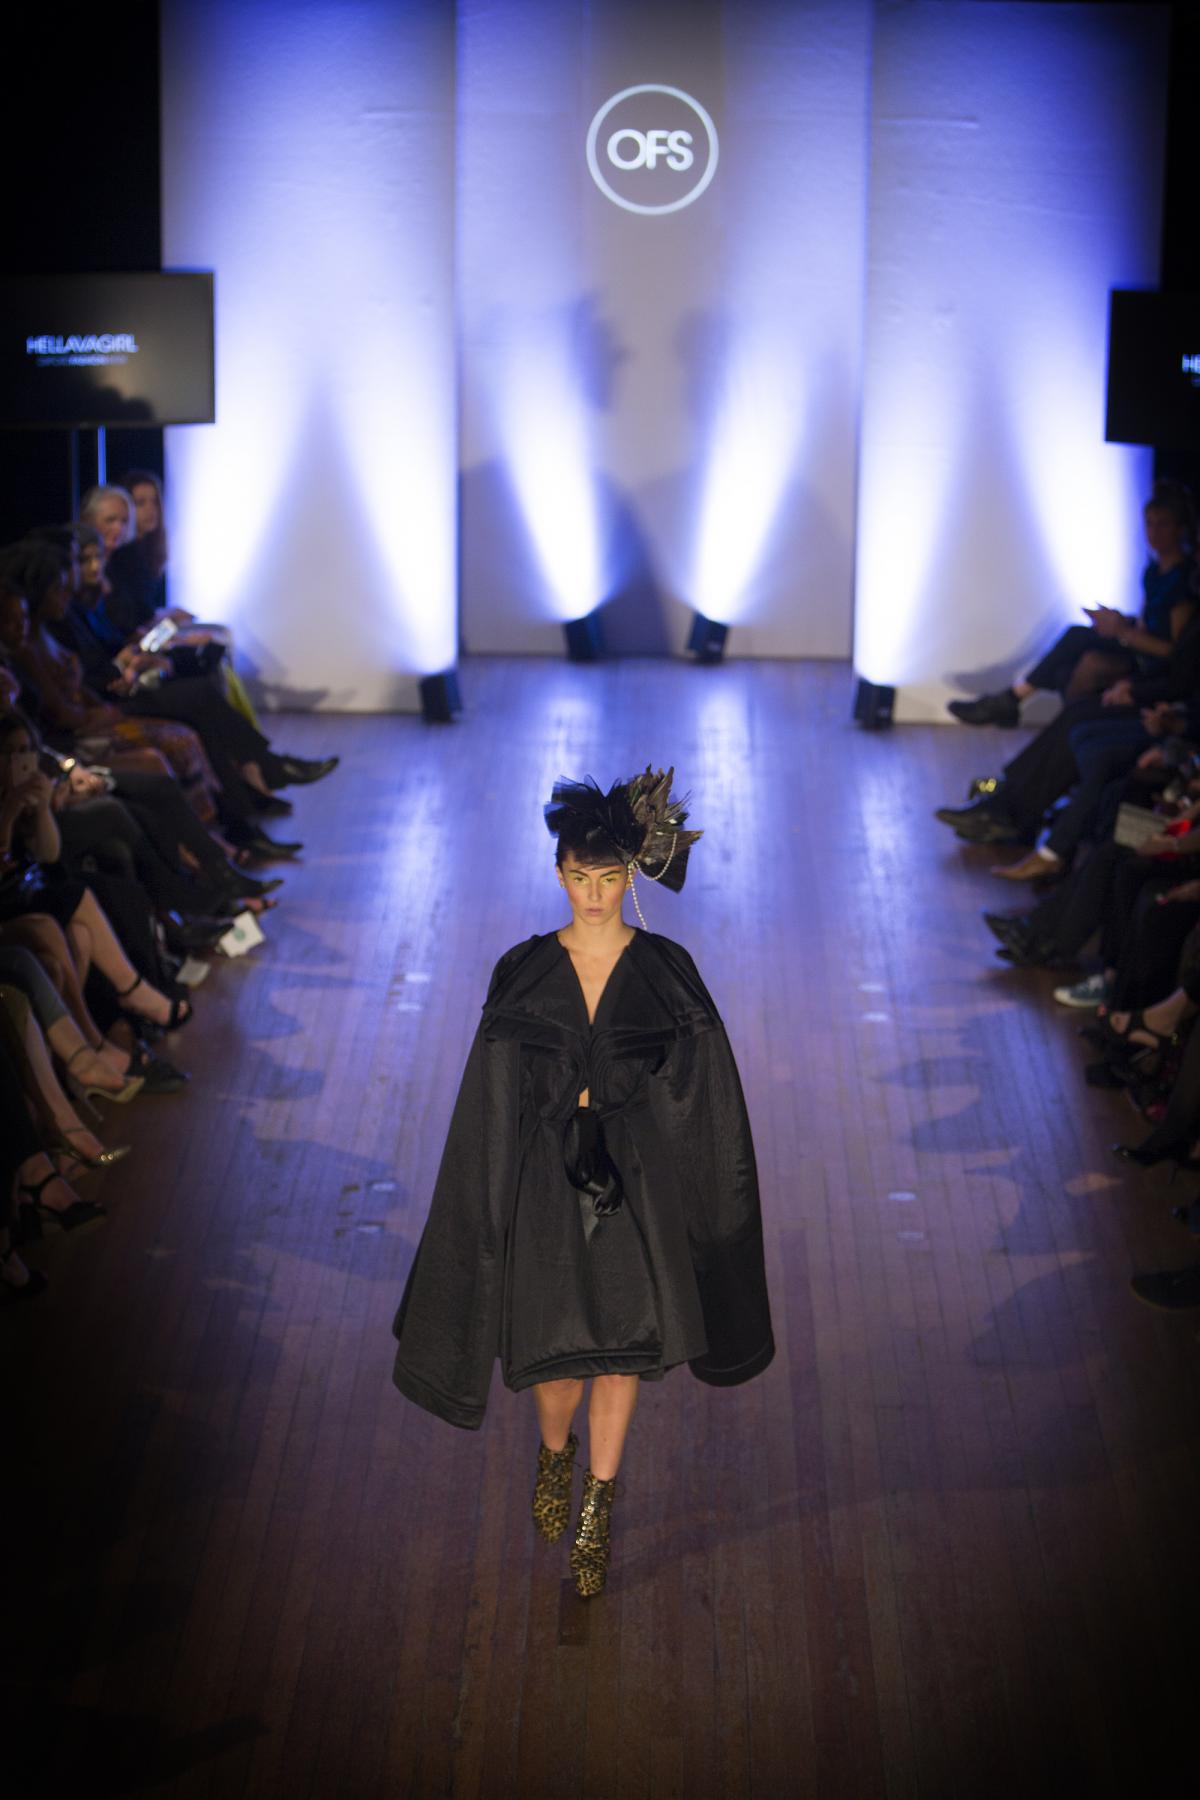 Oxford Fashion Week 2016 at Oxford Town Hall. Including the Concept & Couture Show and The Independent Collections